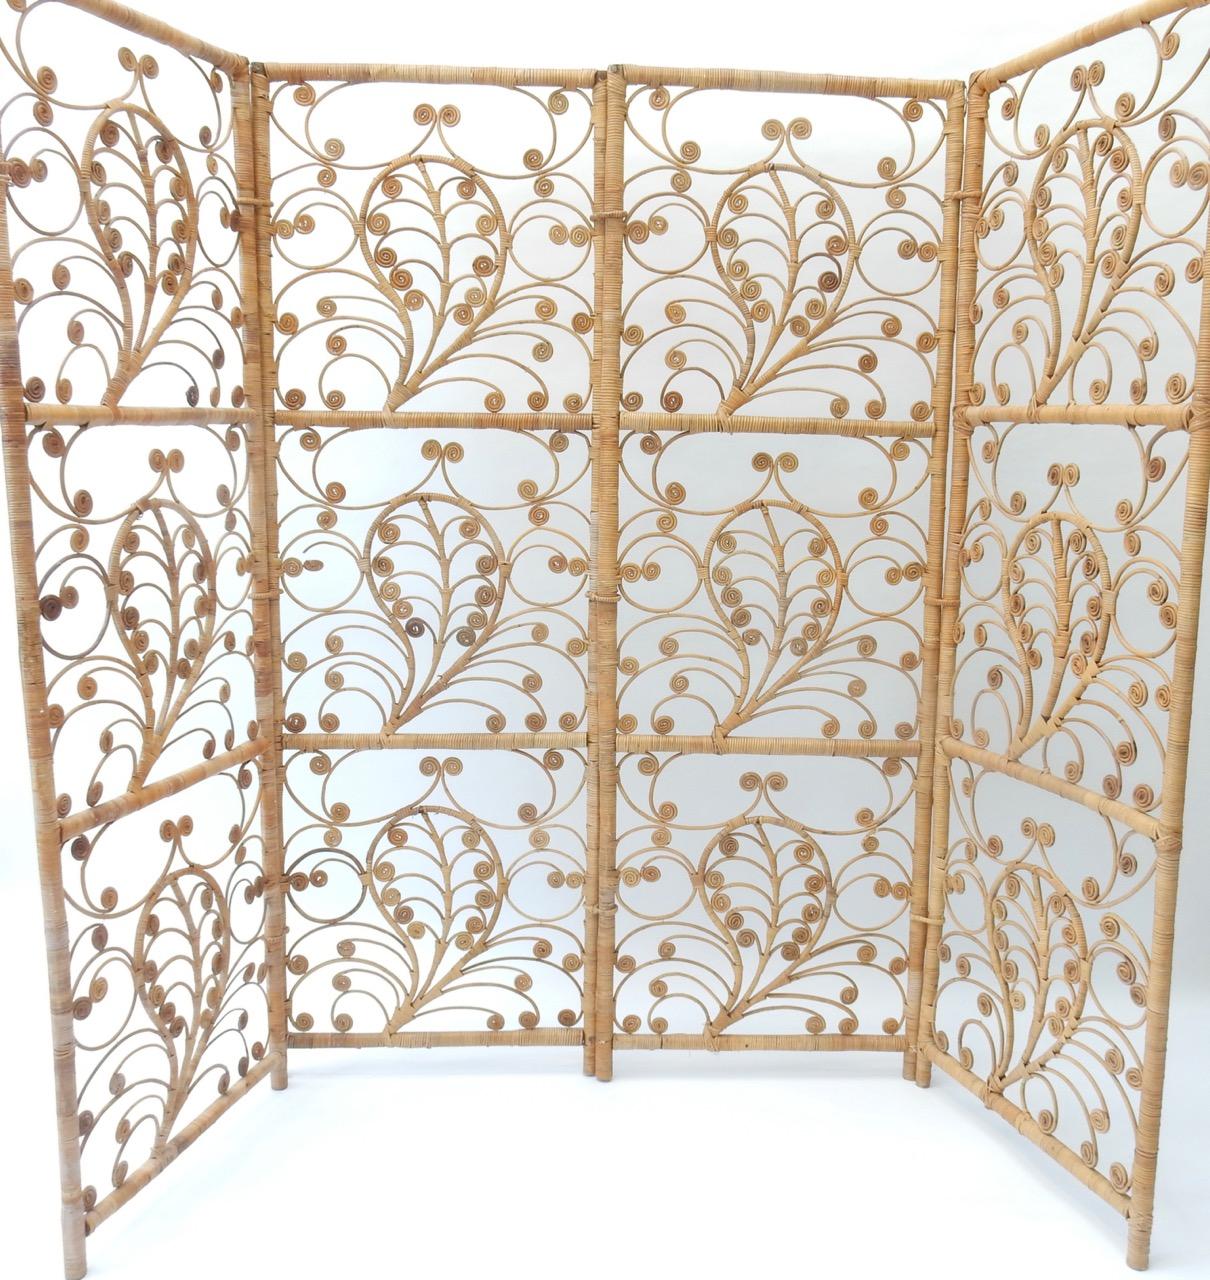 Four-Panel Rattan Screen Room Divider, 1940s For Sale 2